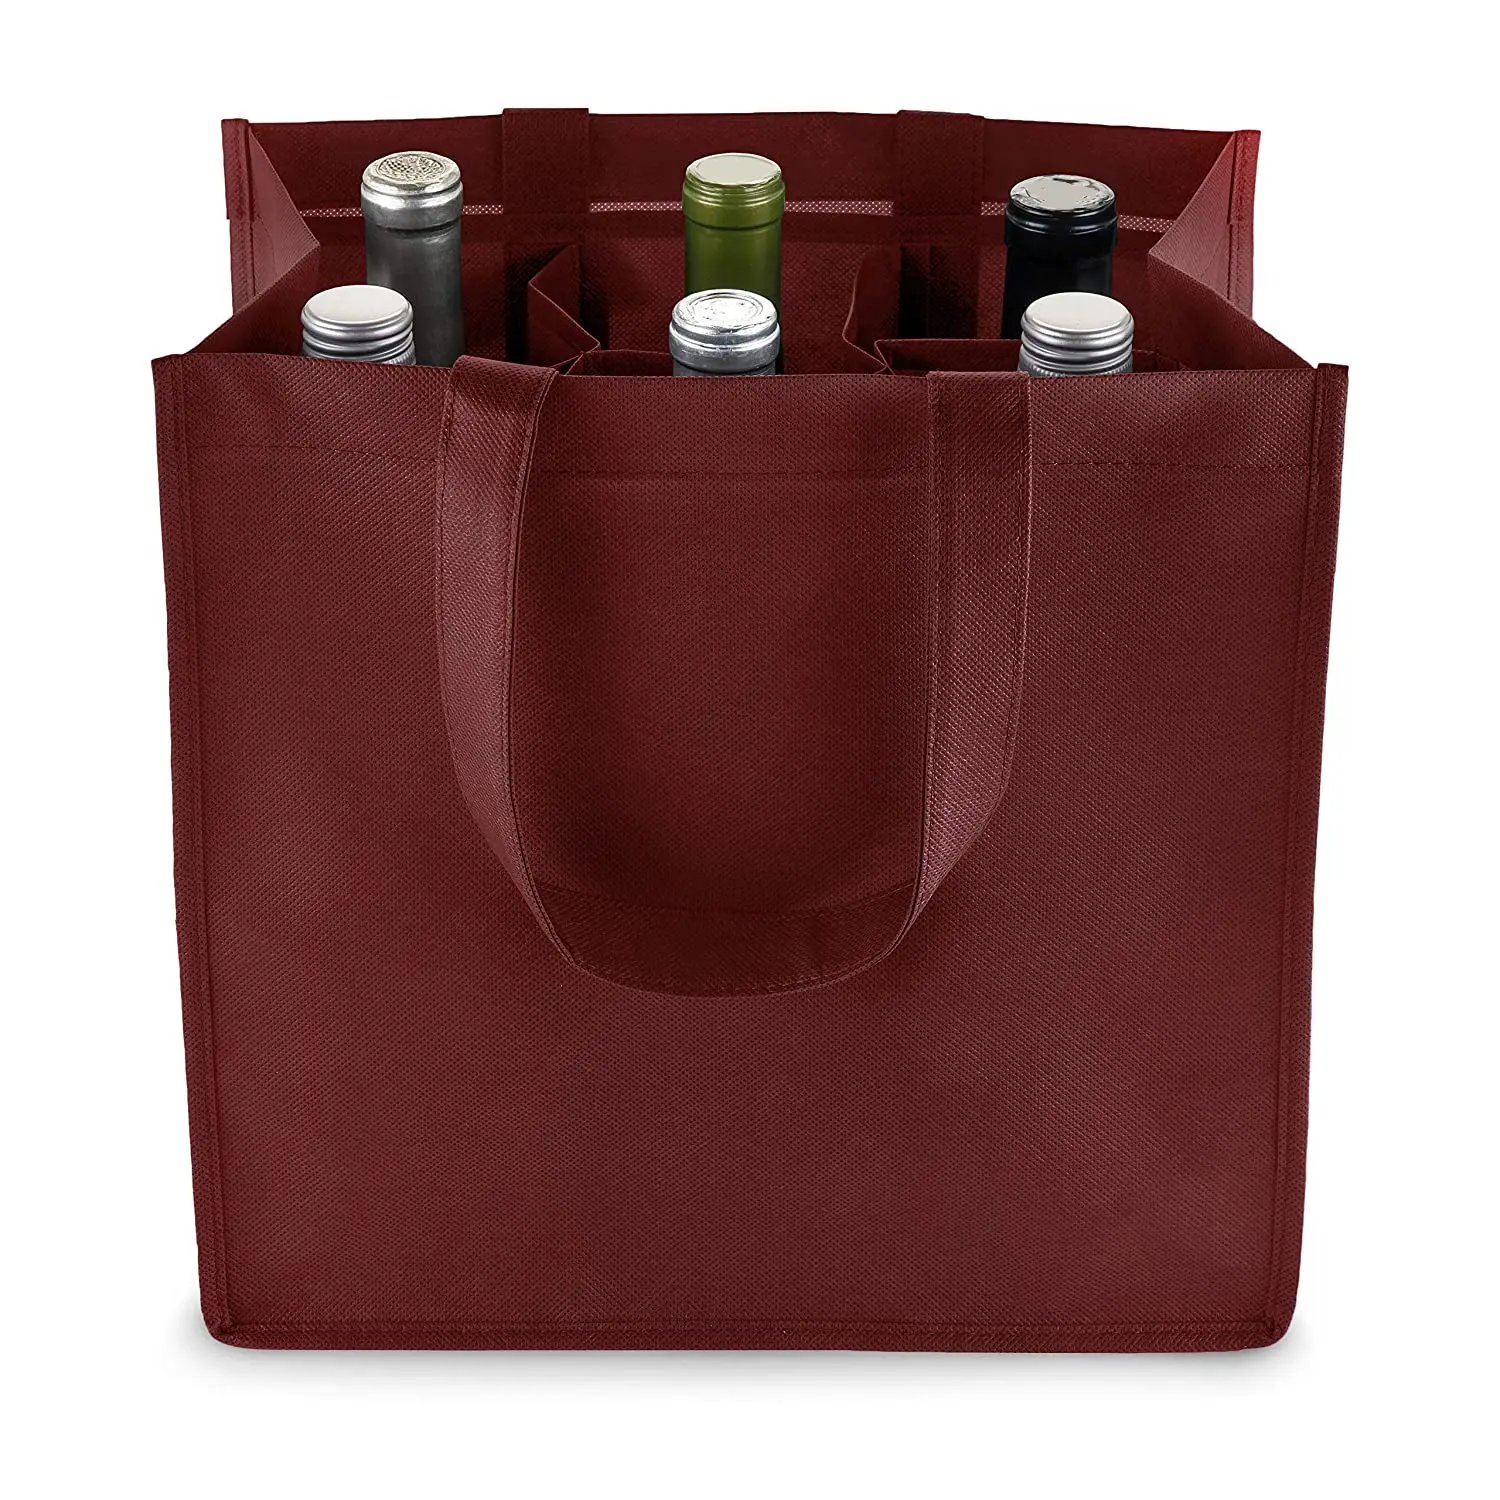 bottle wine carrier bag reusable wine bag portable wine travel bag with handle for picnic camping travel with customized size